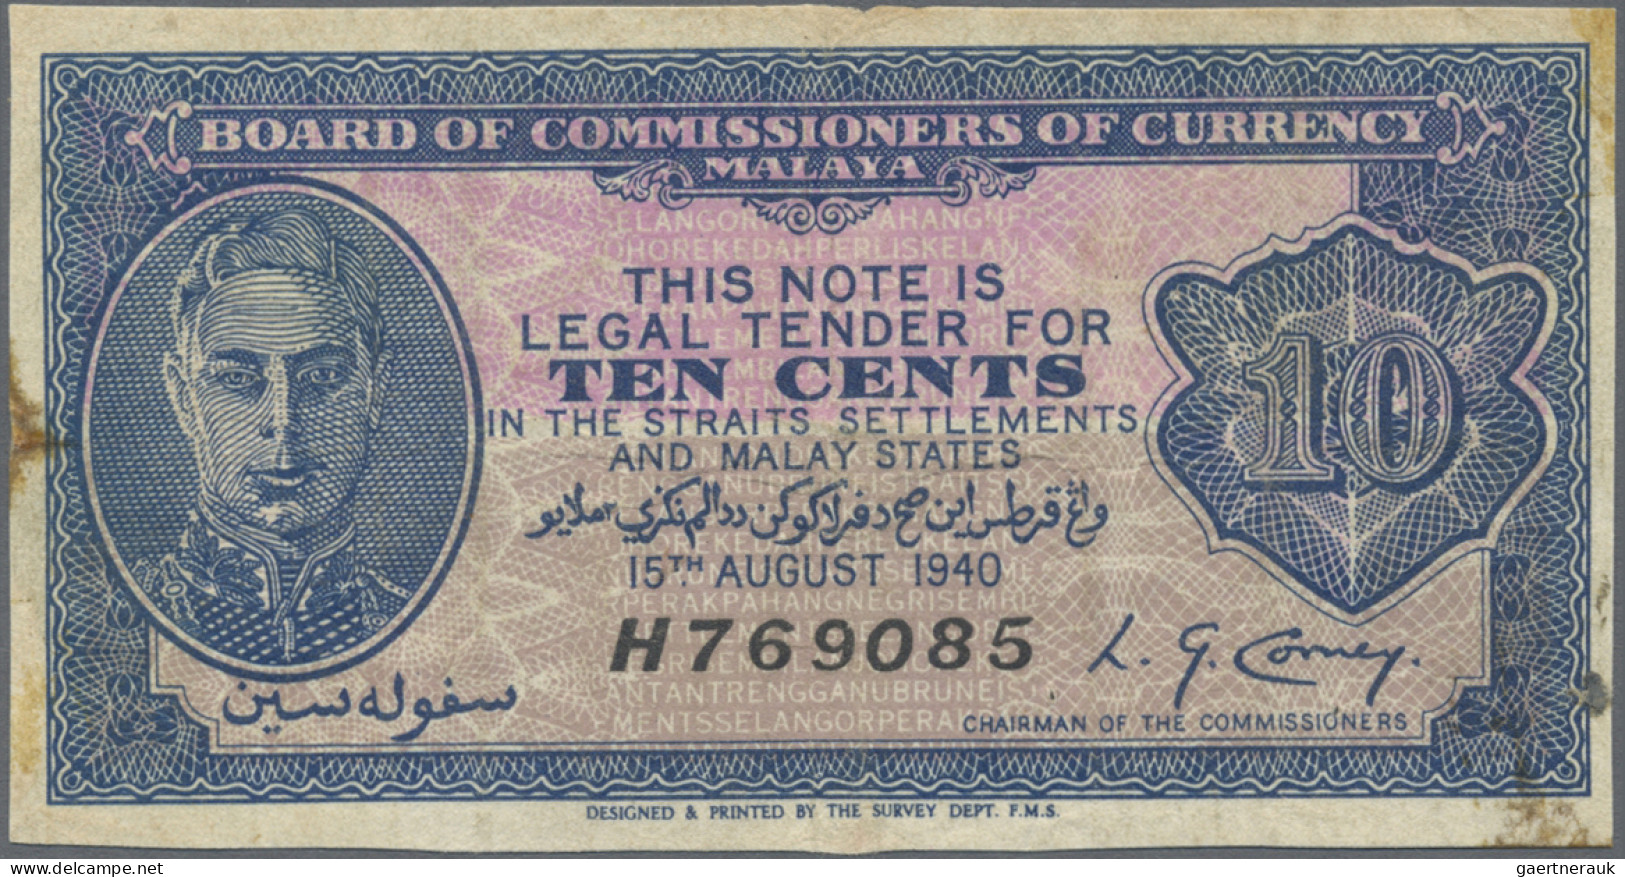 Malaya: Board of Commissioners of Currency – MALAYA, lot with 7 banknotes, with